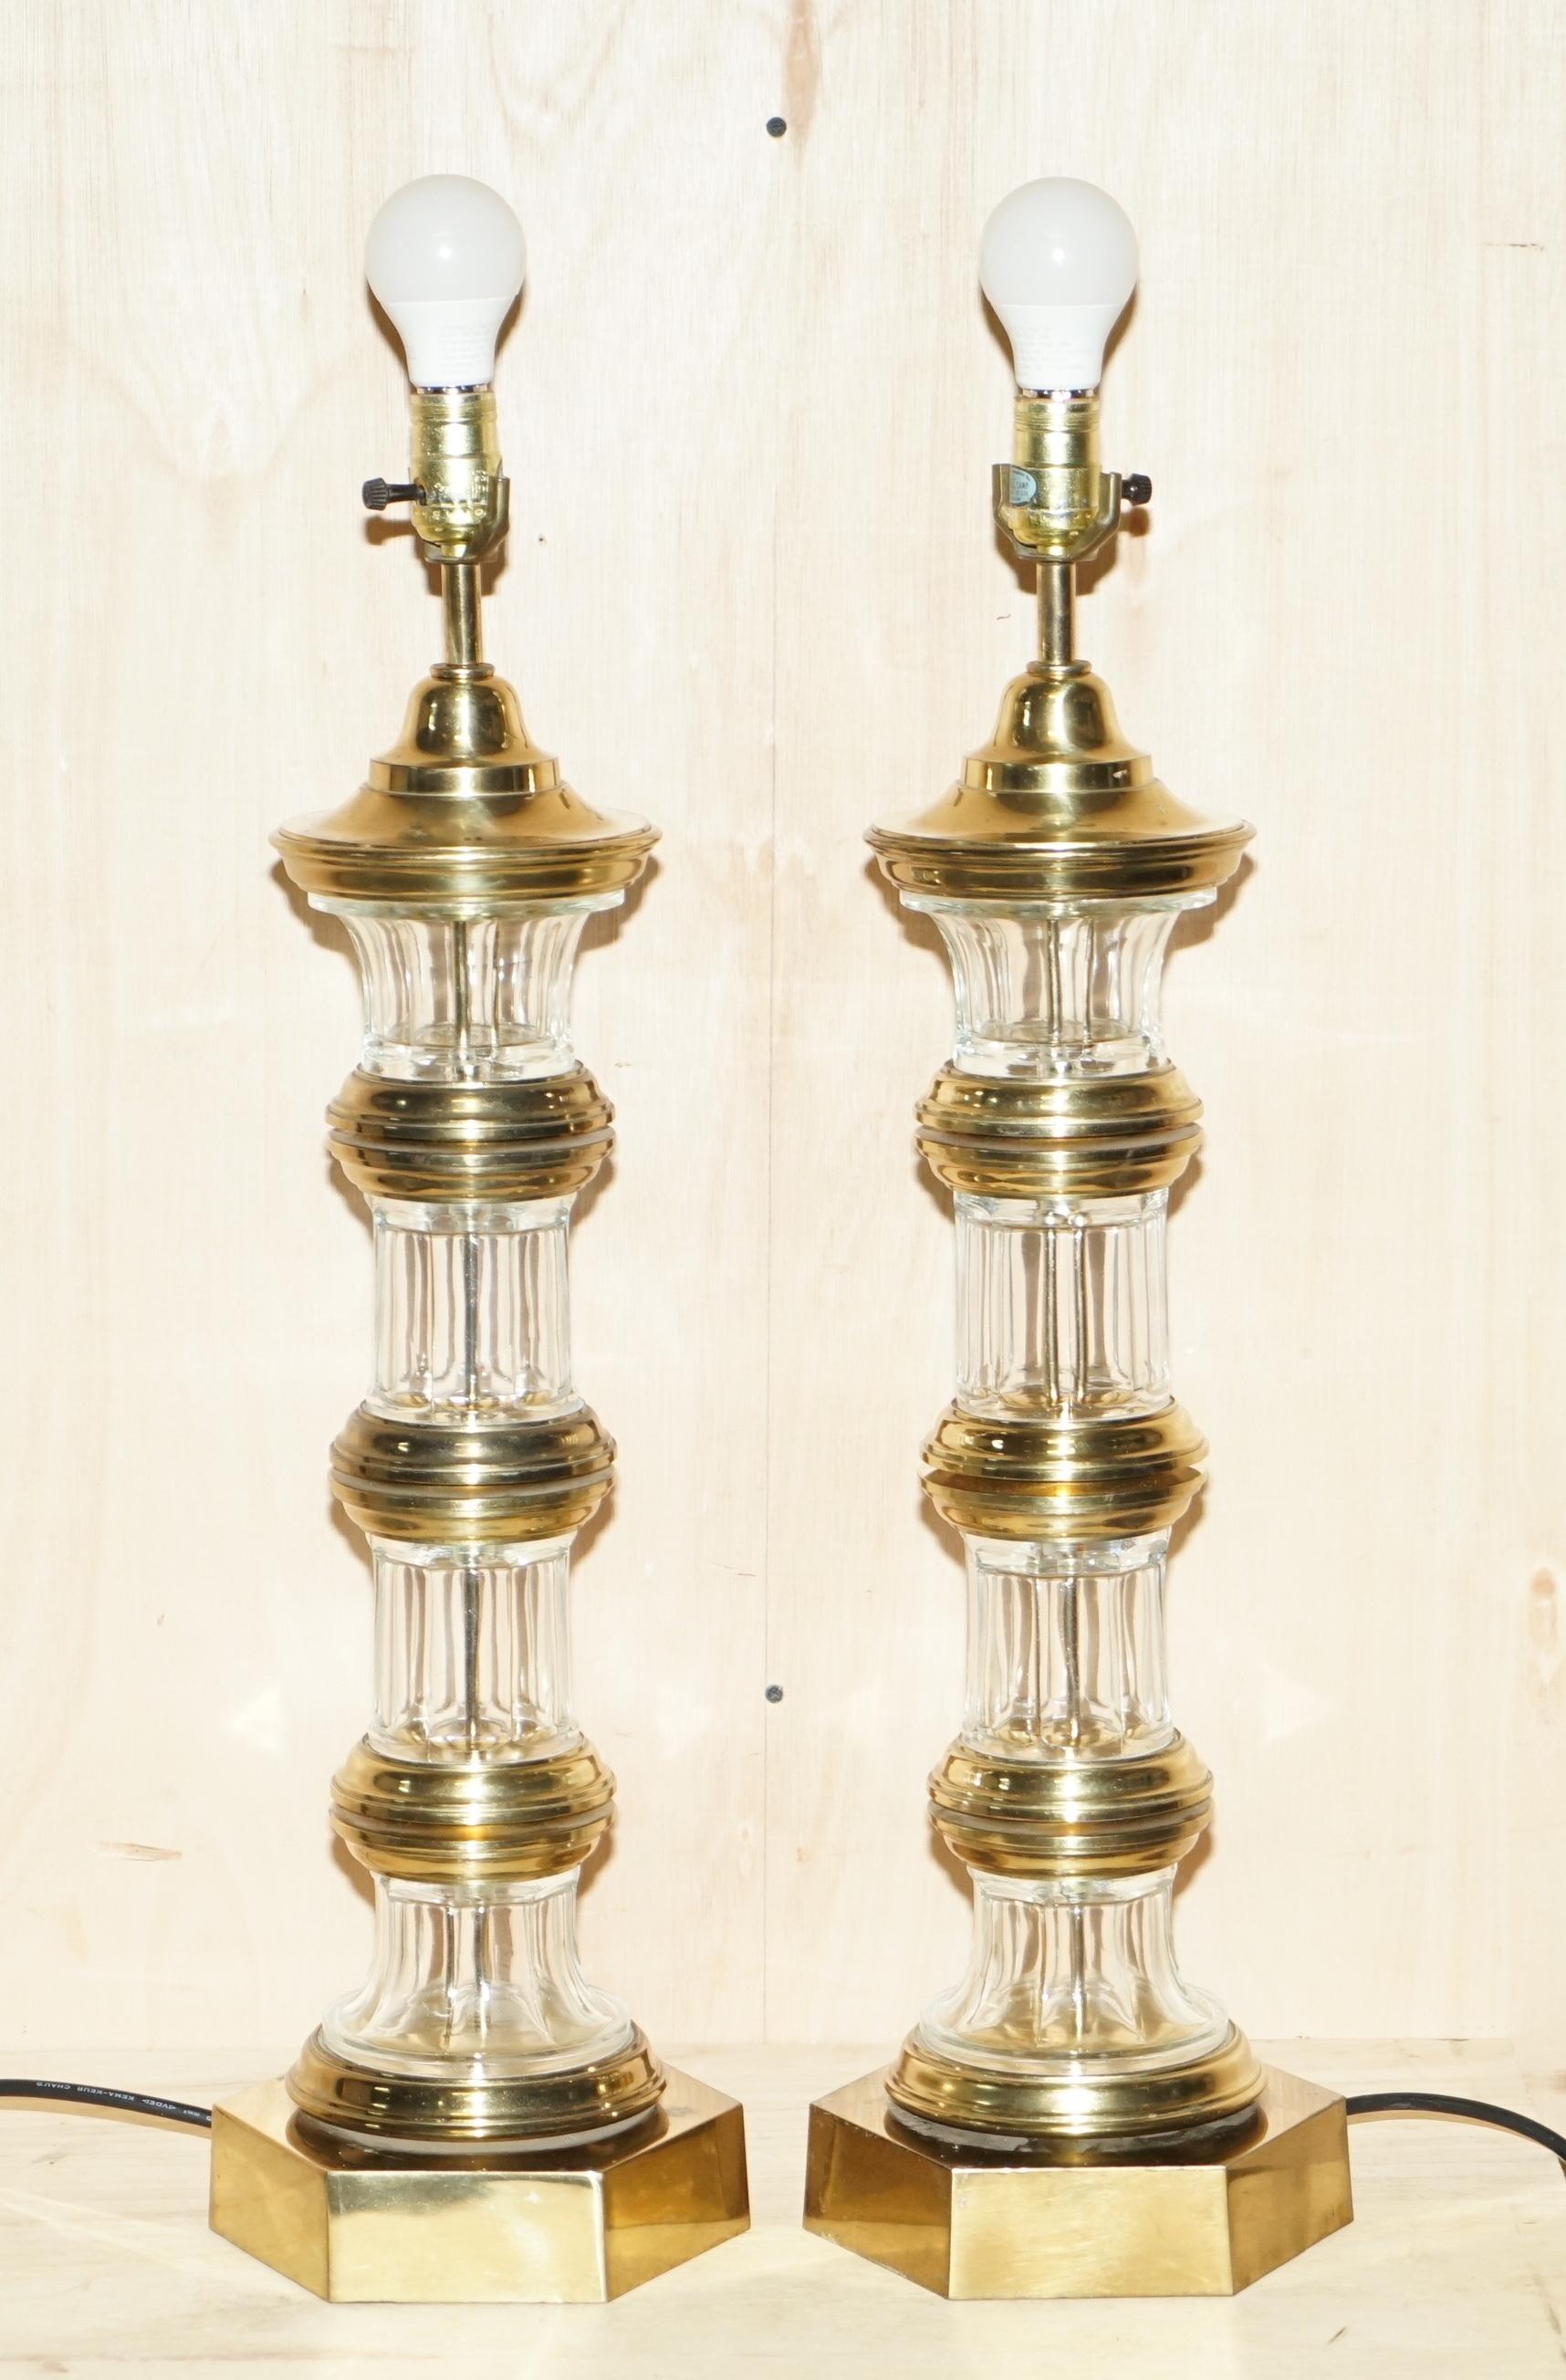 We are delighted to offer for sale this stunning pair of vintage glass and brass large Lighthouse table lamps

These lamps came from a very fine antiques dealer in Belgium, he has a client that purchases antique Italian lighting to import to the